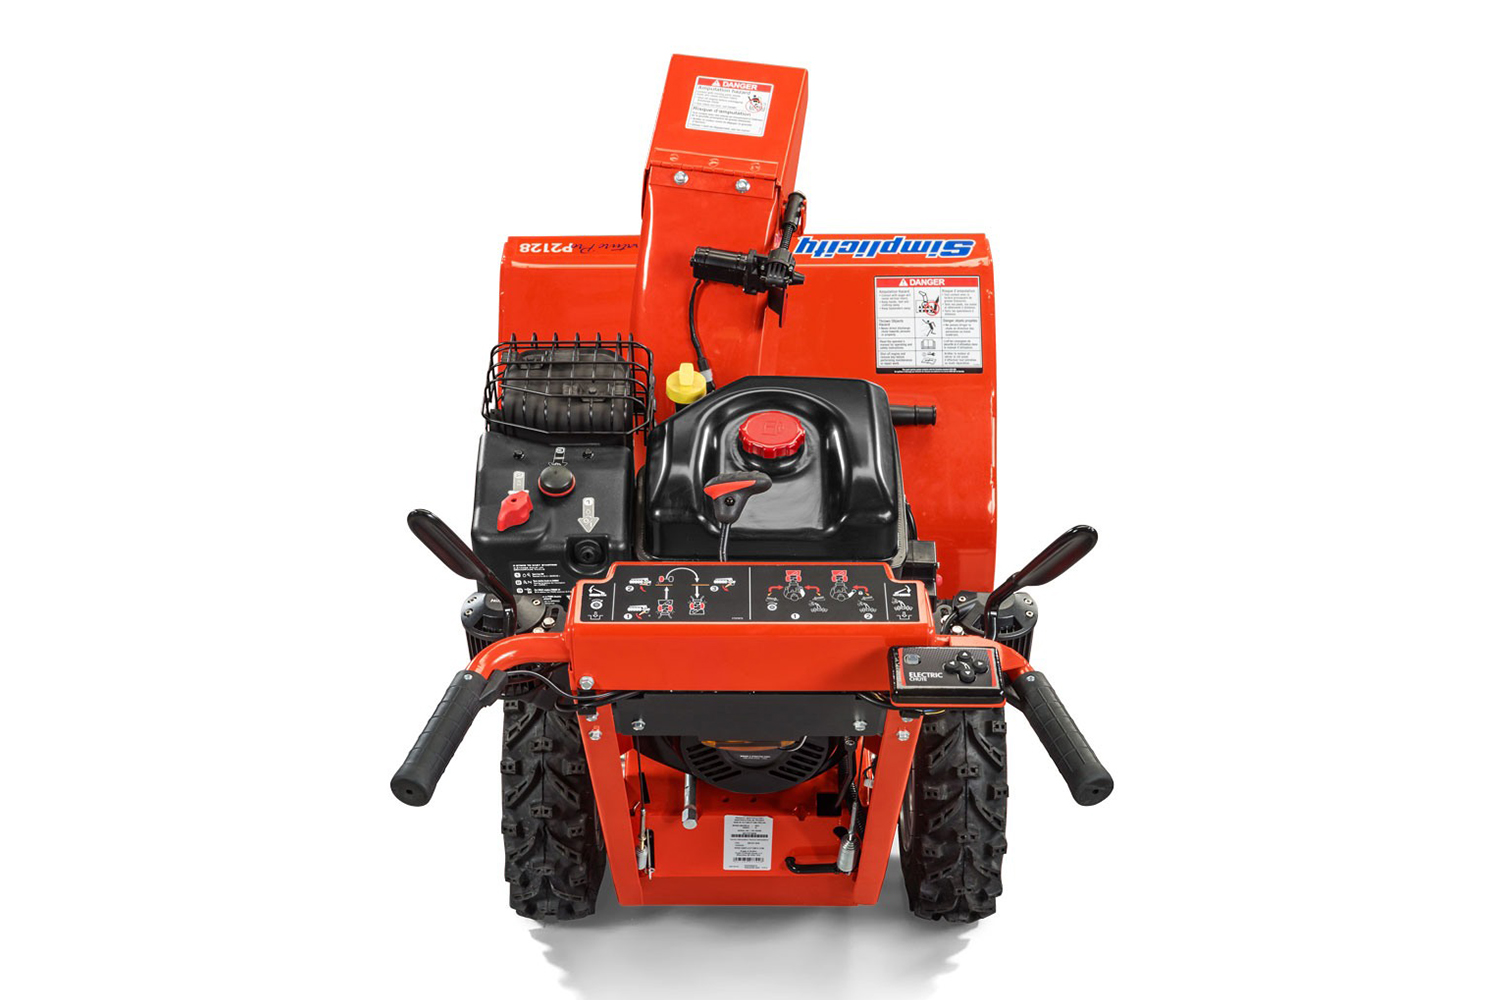 SIMPLICITY SIGNATURE PRO SERIES DUAL-STAGE SNOW BLOWER P2138<br/>*Model shown in image may vary.